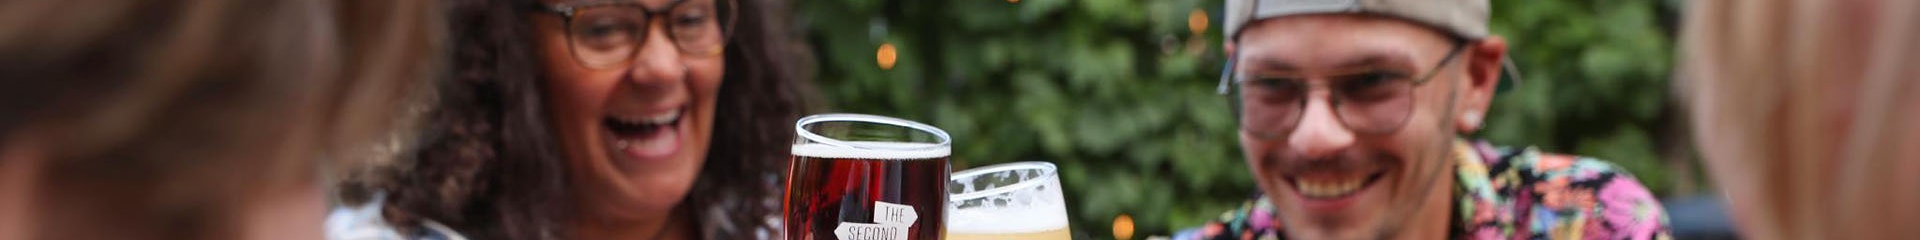 Second Wedge Brewery Cheers